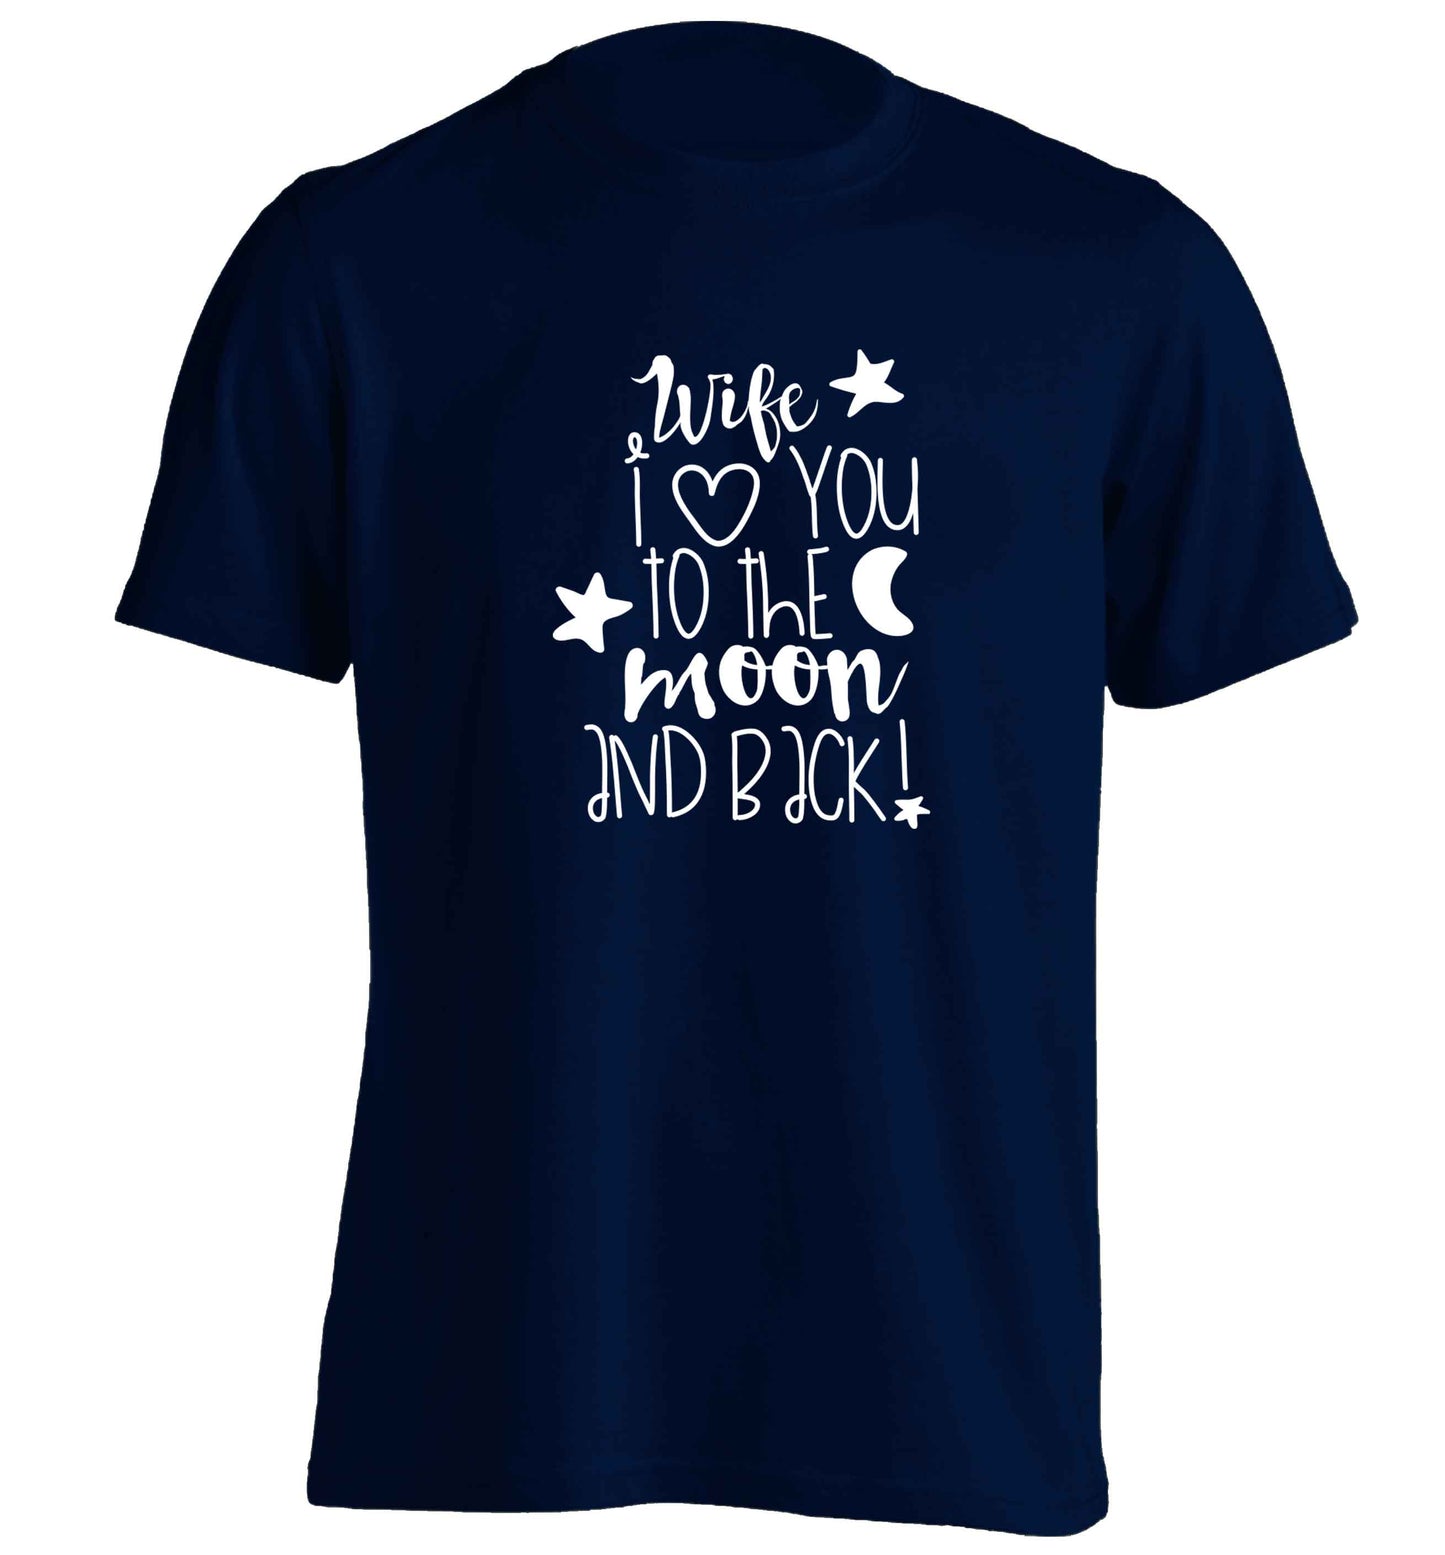 Wife I love you to the moon and back adults unisex navy Tshirt 2XL